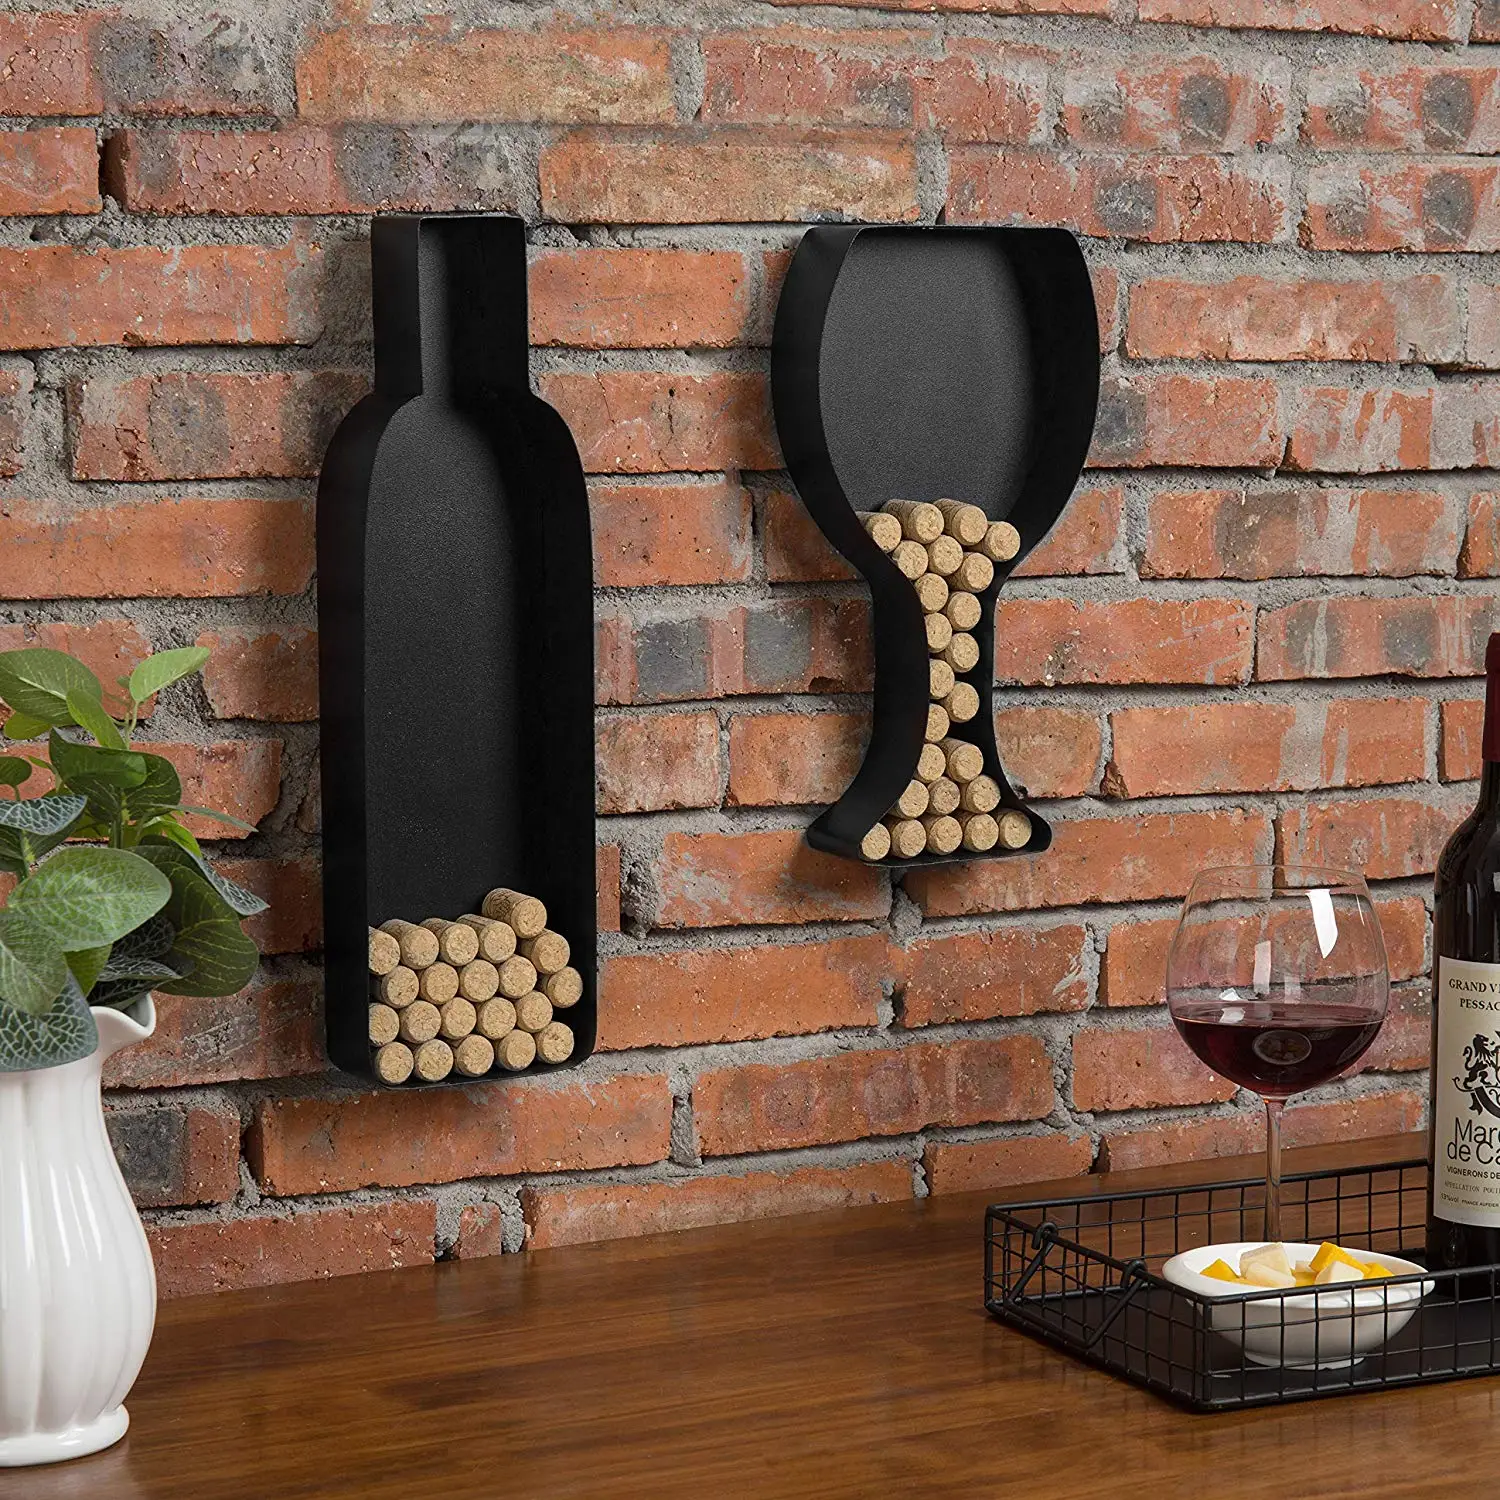 EPG-Life Metal Wine Rack Wall Mounted with Wine Cork Holder and Glass Holder Black 